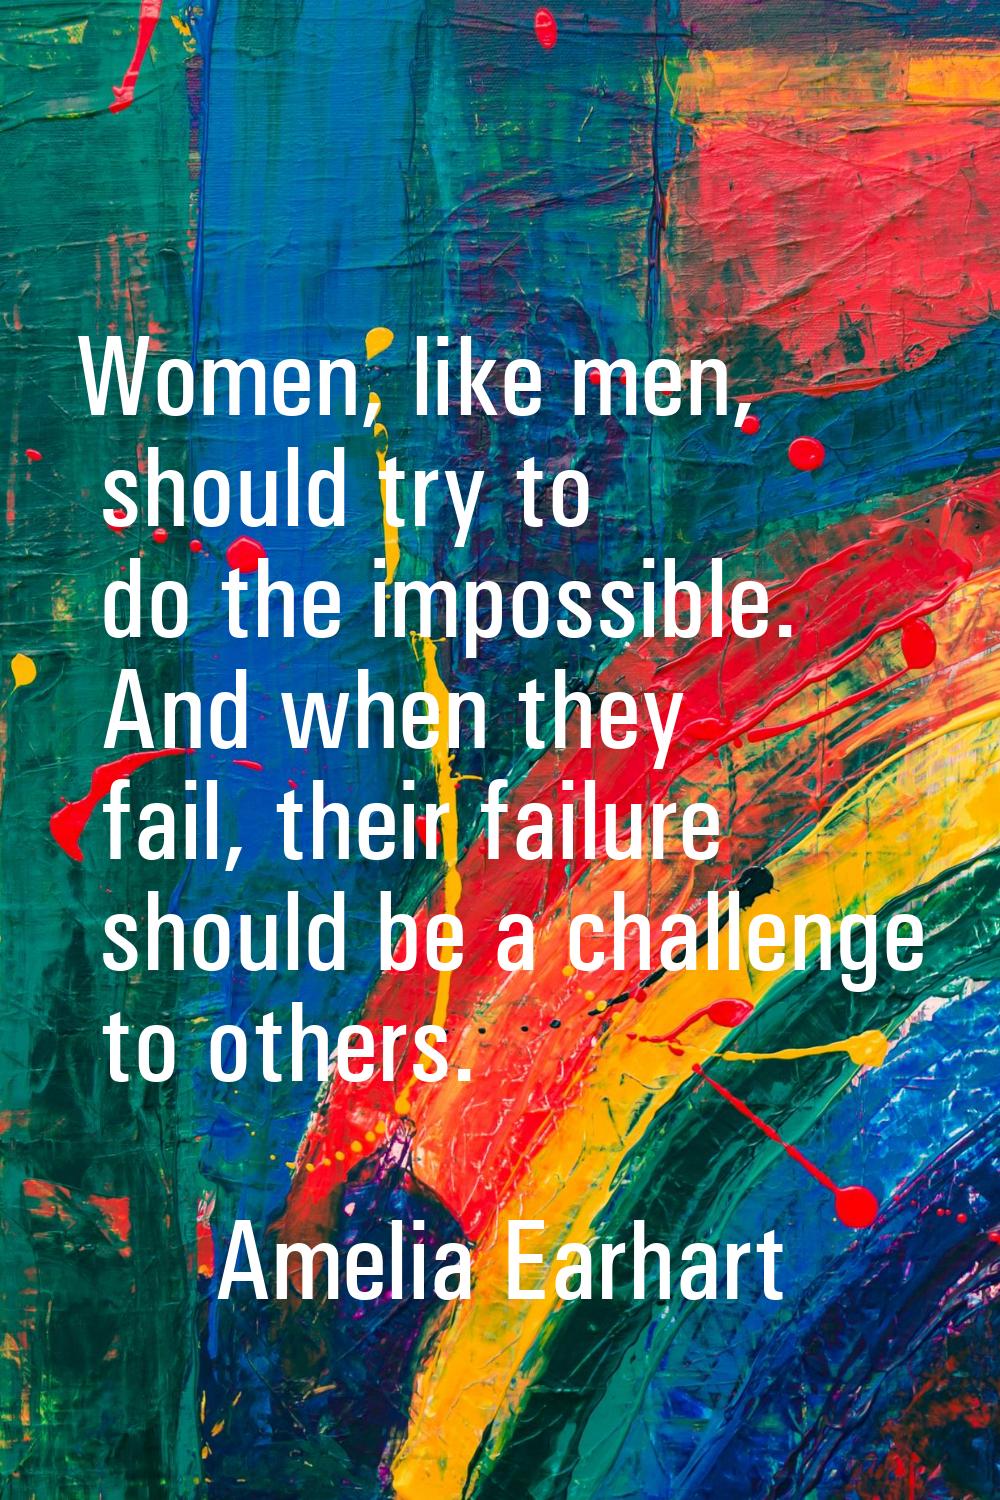 Women, like men, should try to do the impossible. And when they fail, their failure should be a cha